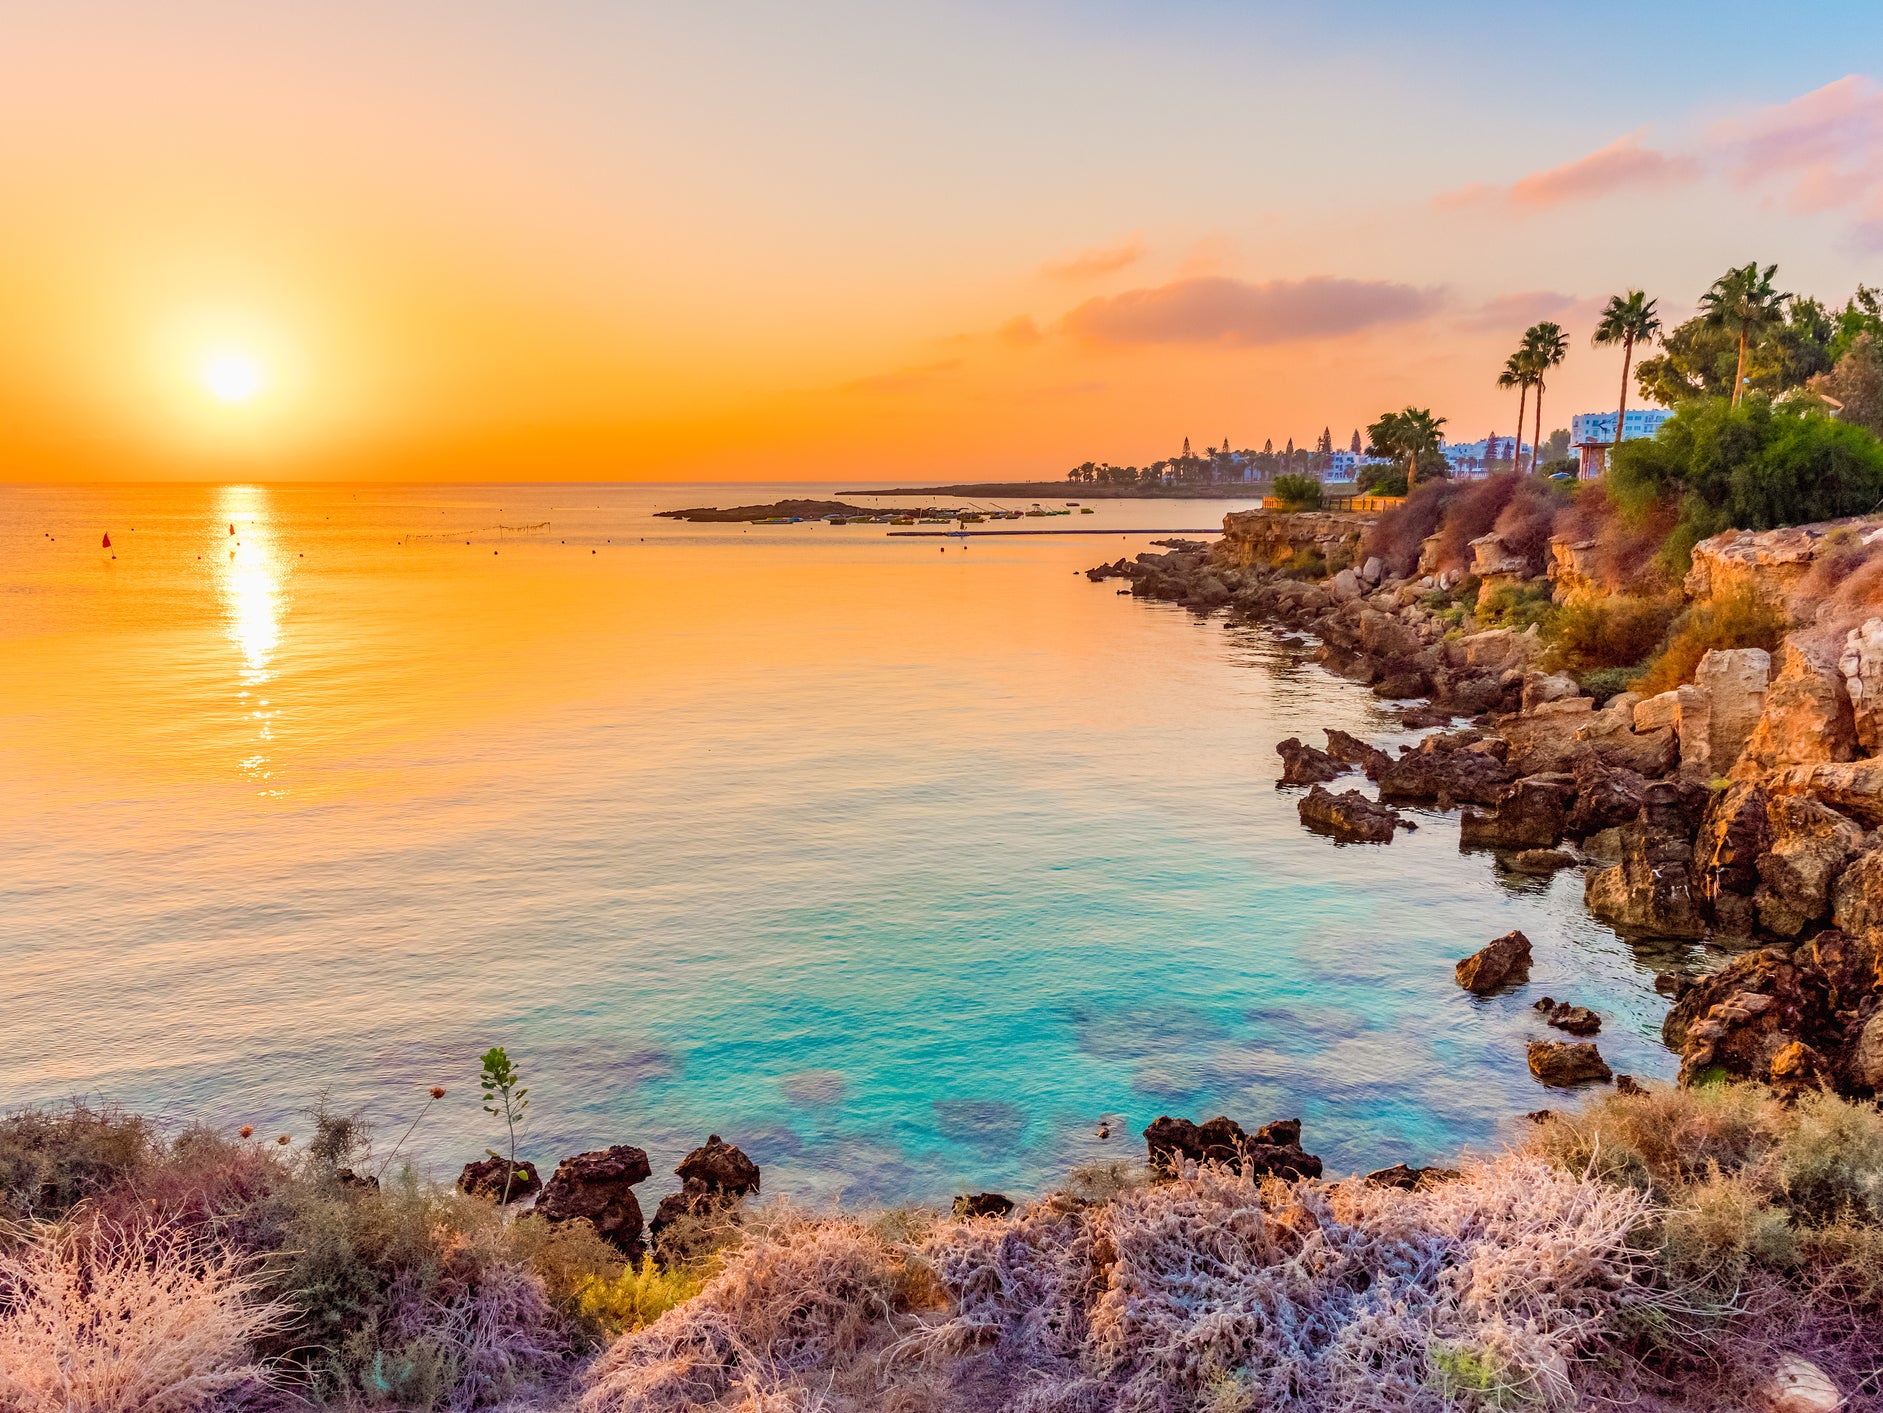 Cyprus is a great island to jet off to if you want an autumn adventure